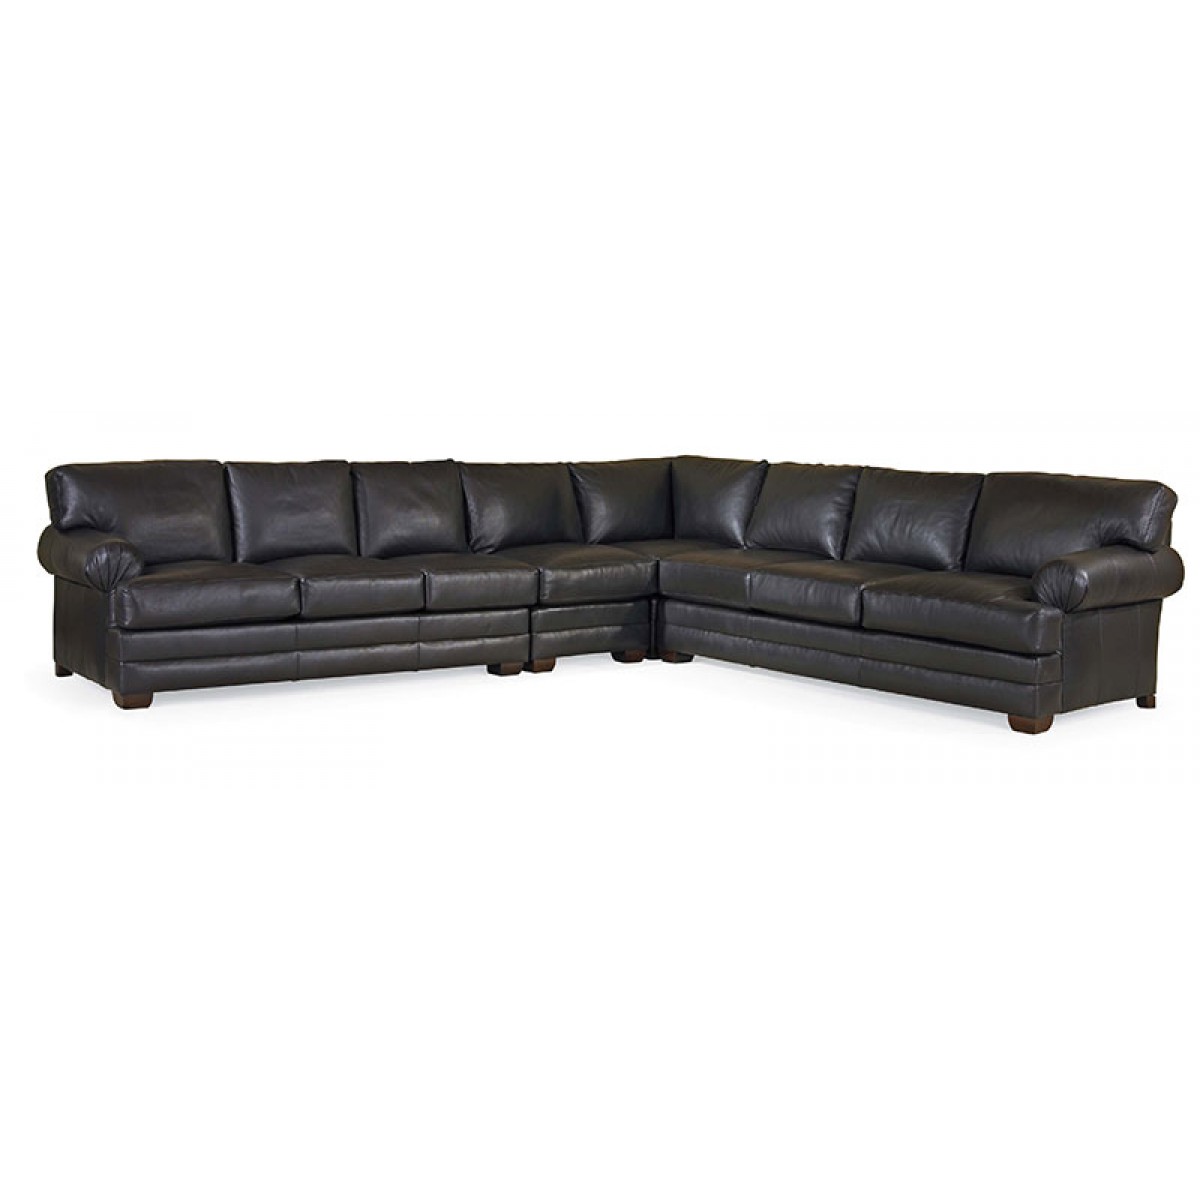 Century Furniture Best Place to Buy Leather Sofa Brooklyn, New York, Furniture by ABD 